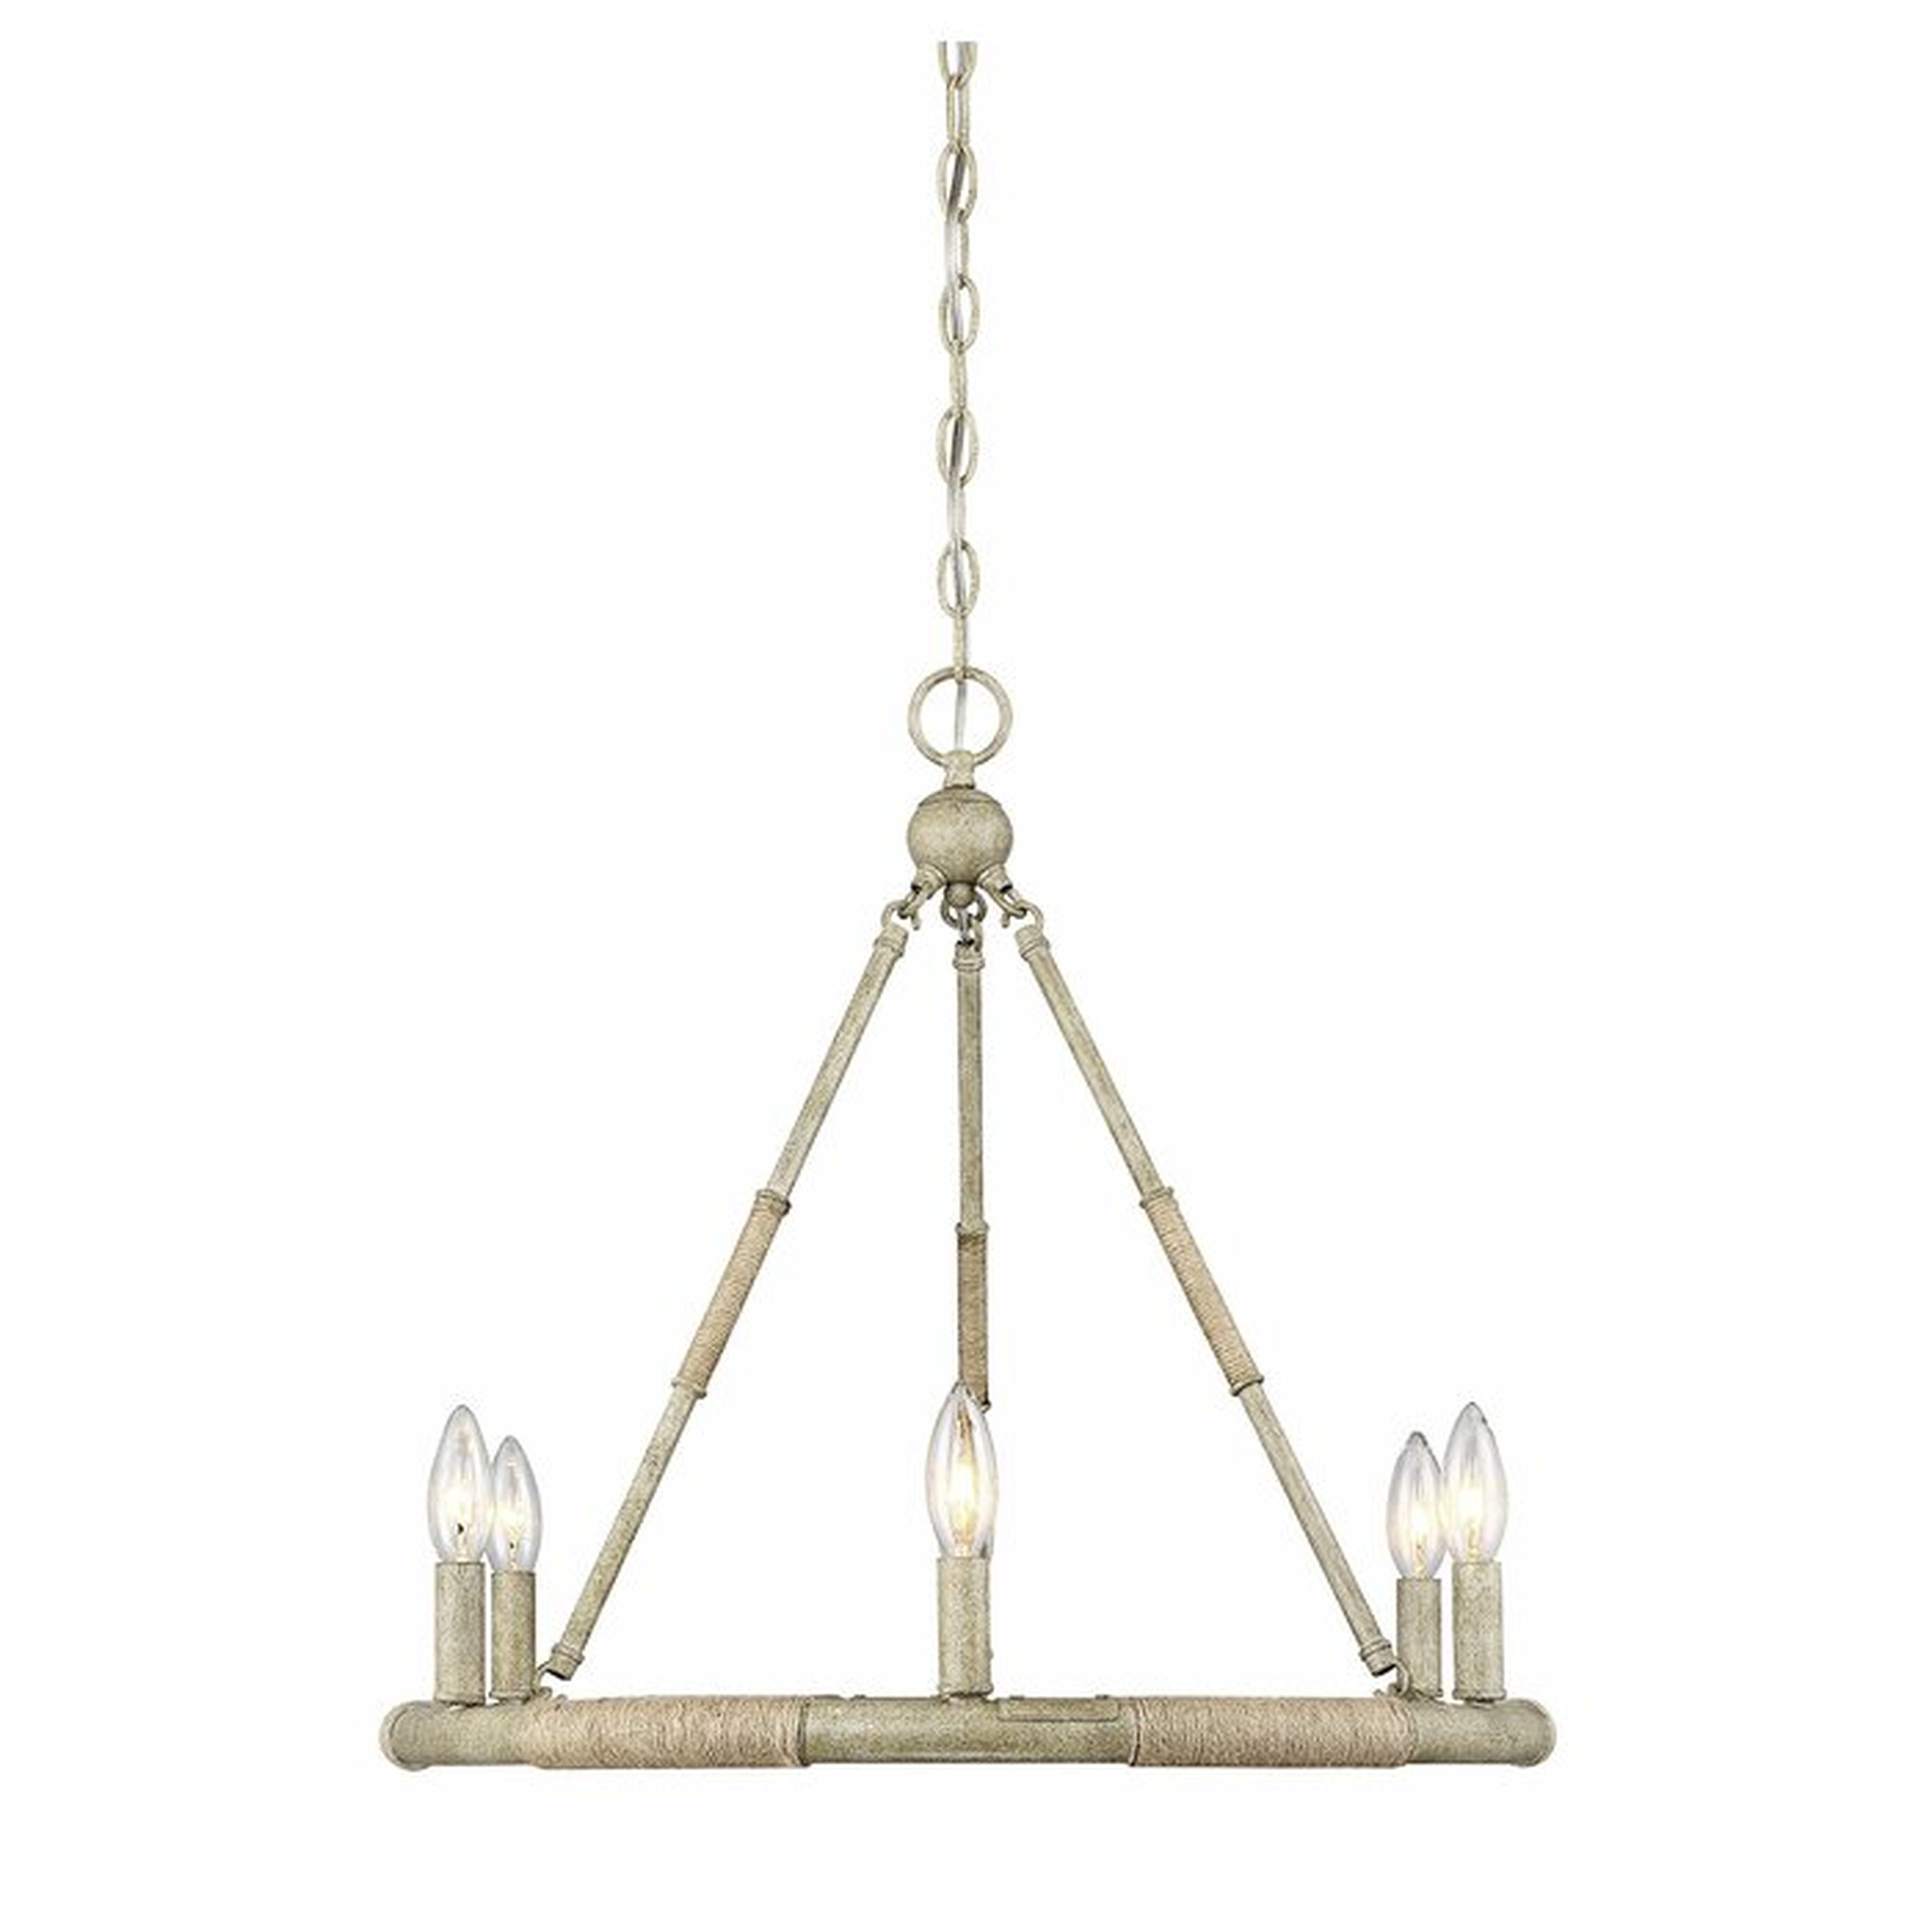 Miley 6 - Light Candle Style Wagon Wheel Chandelier with Rope Accents - Wayfair